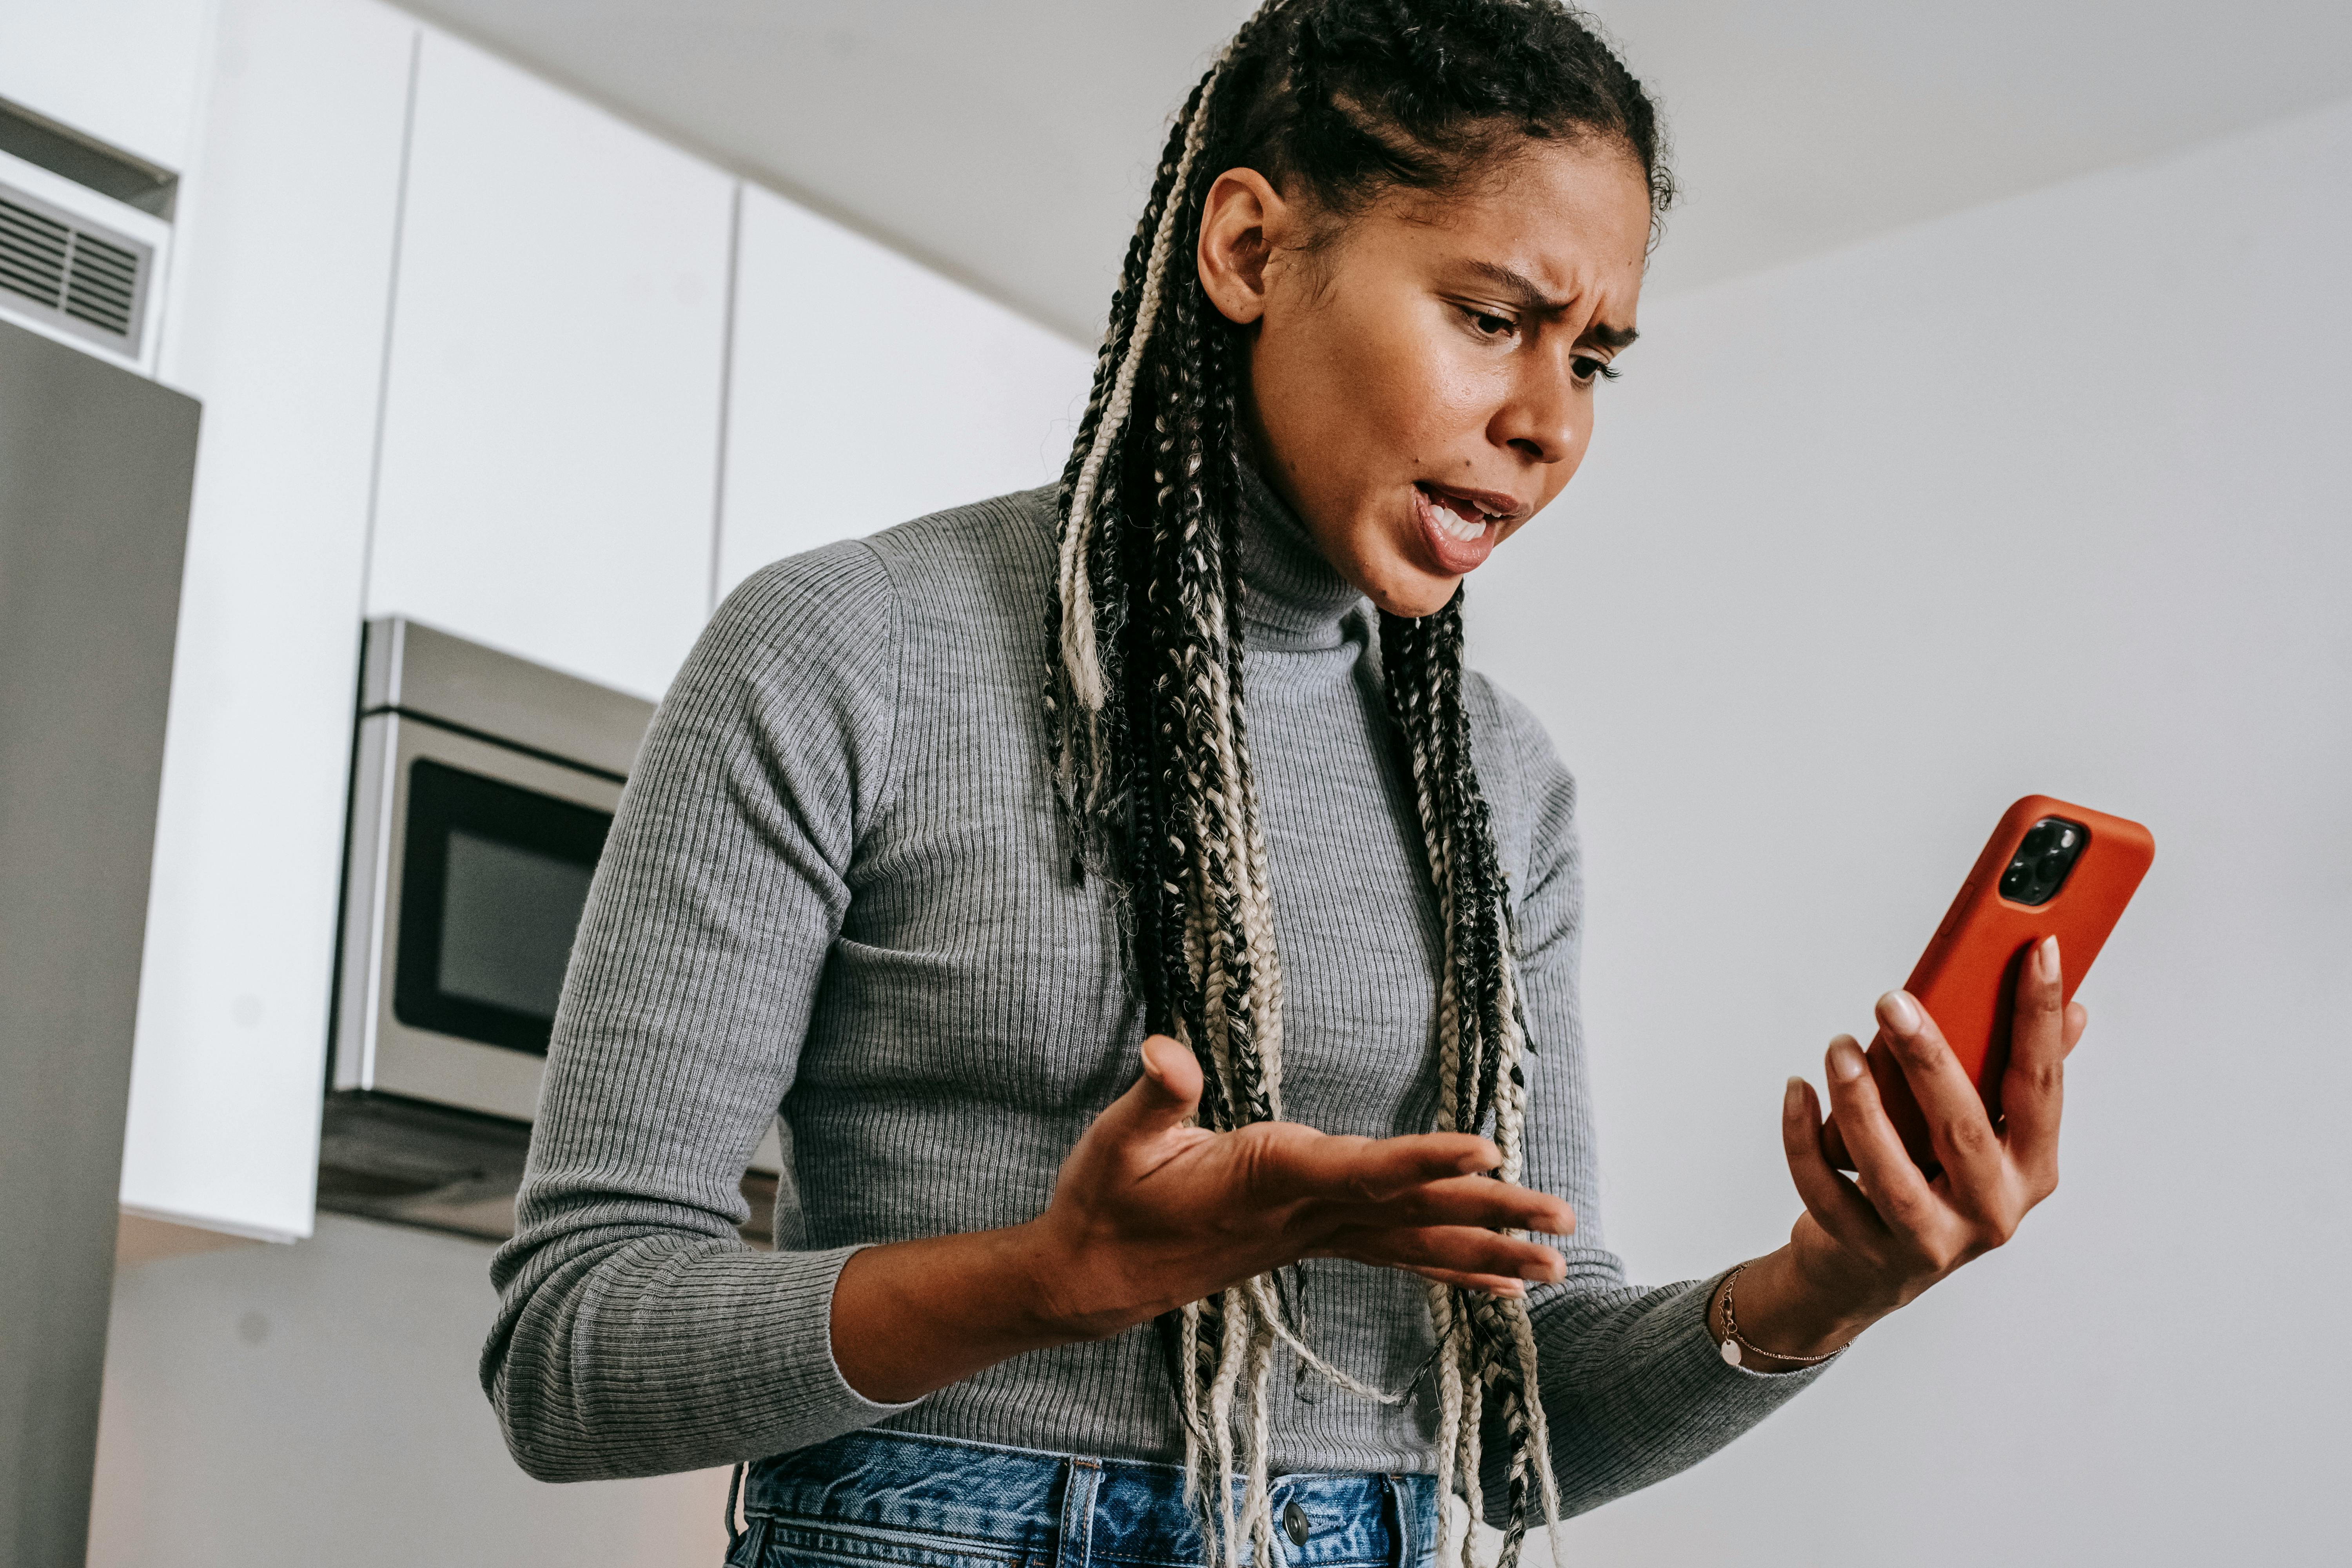 An angry woman on the phone | Source: Pexels